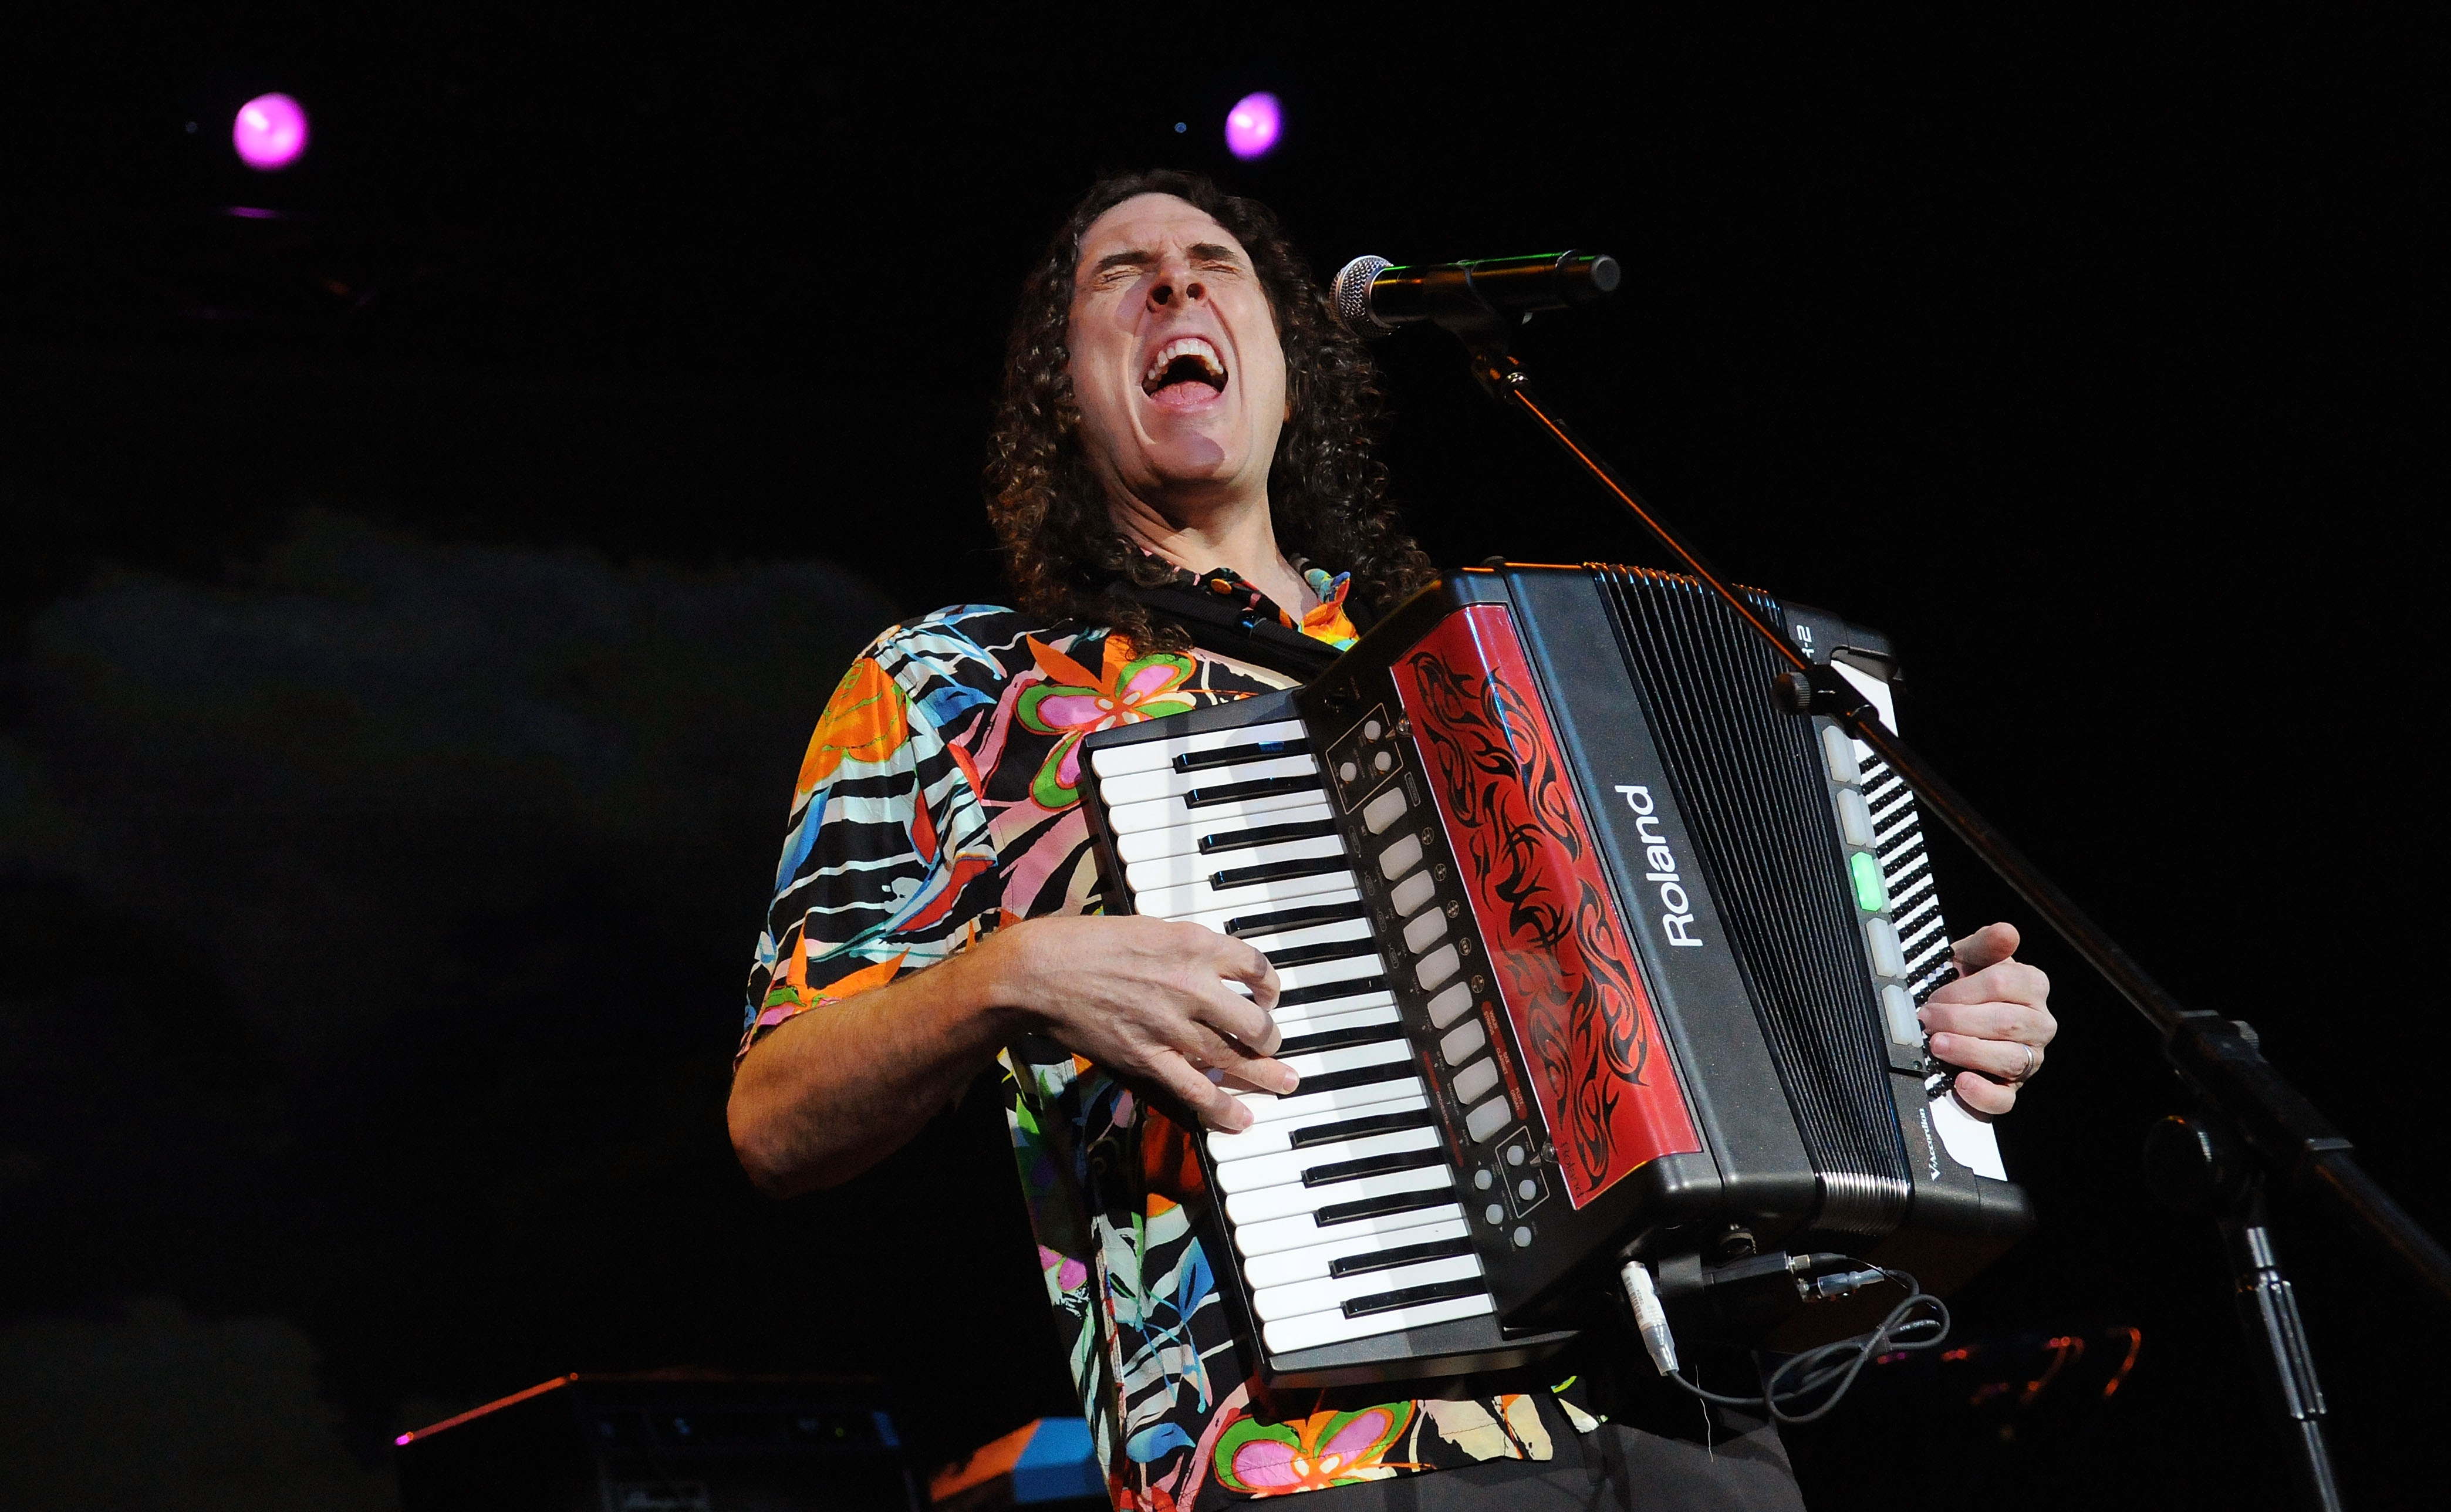 Weird Al Yankovic in a hawaiian shirt wails a song lyric while jamming out on a red and black accordian